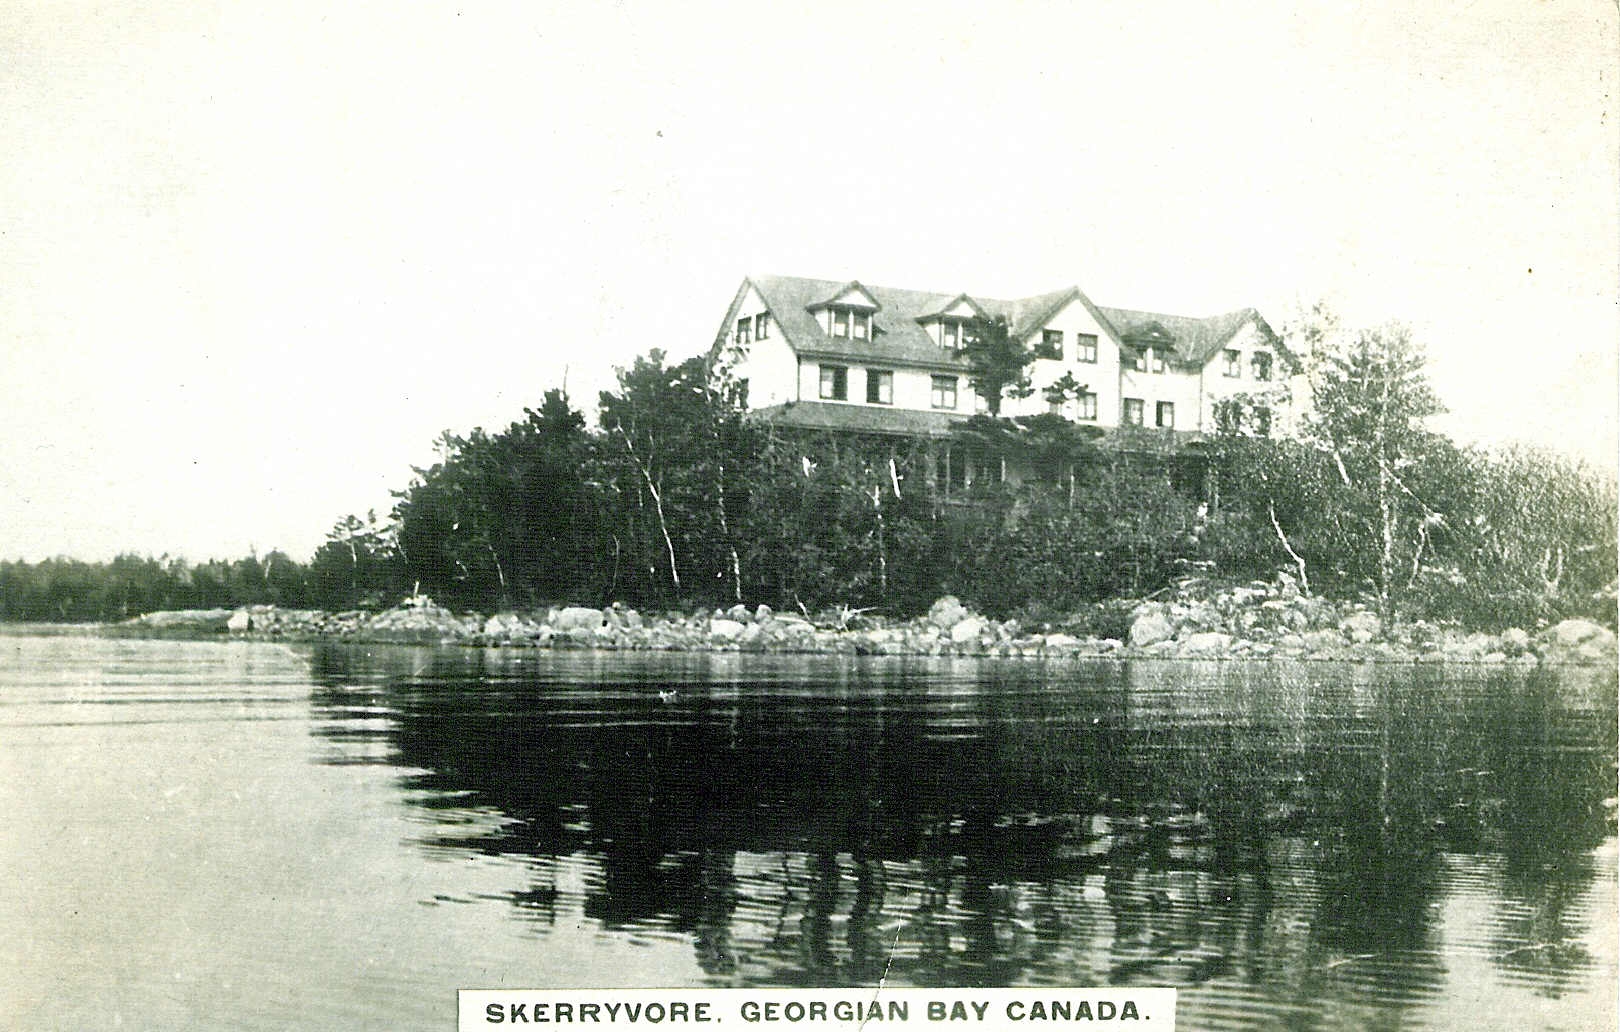 SkerryvoreHotelabout1940